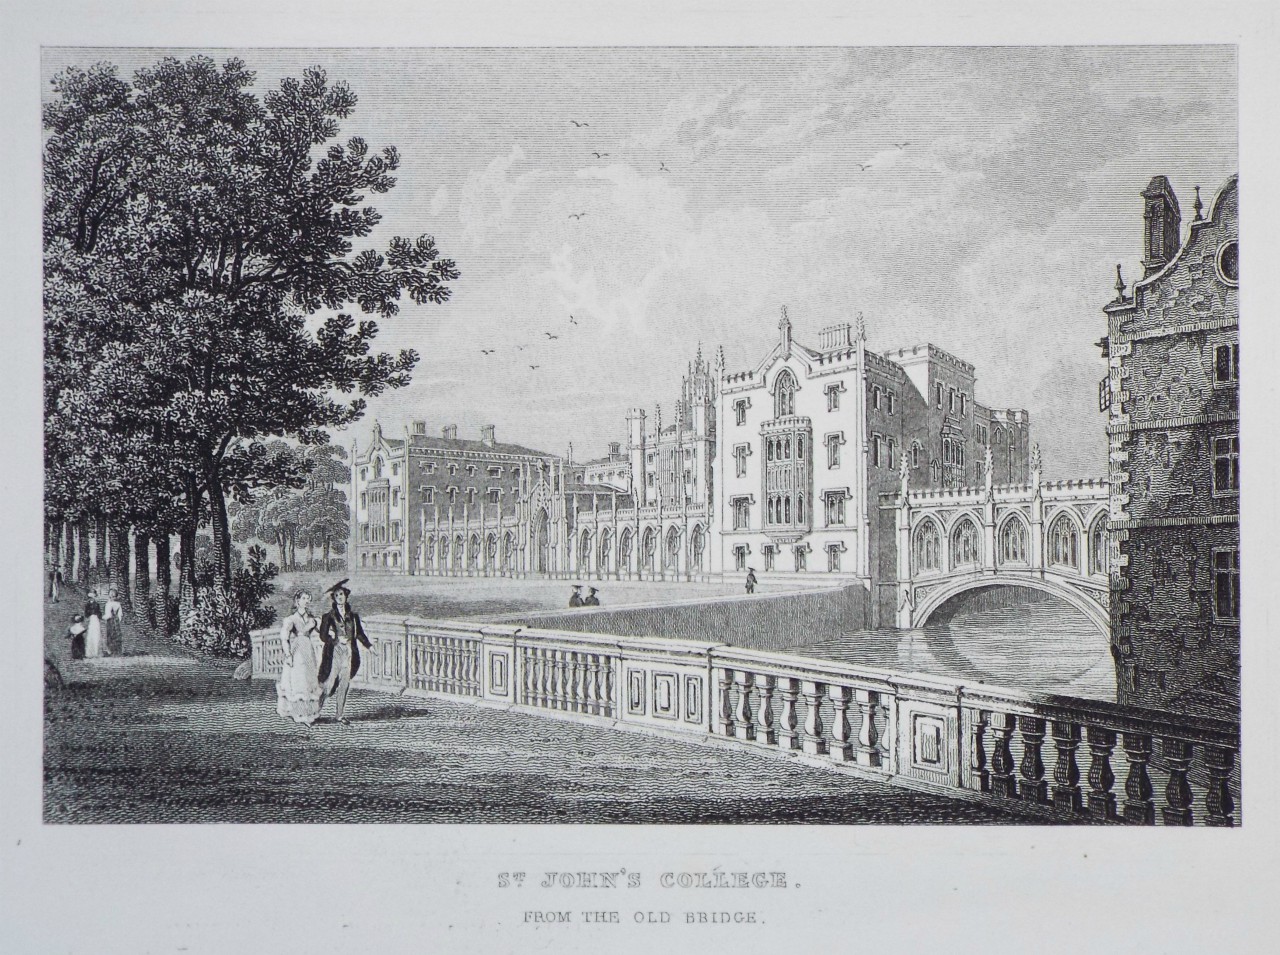 Print - St. John's College. From the Old Bridge.